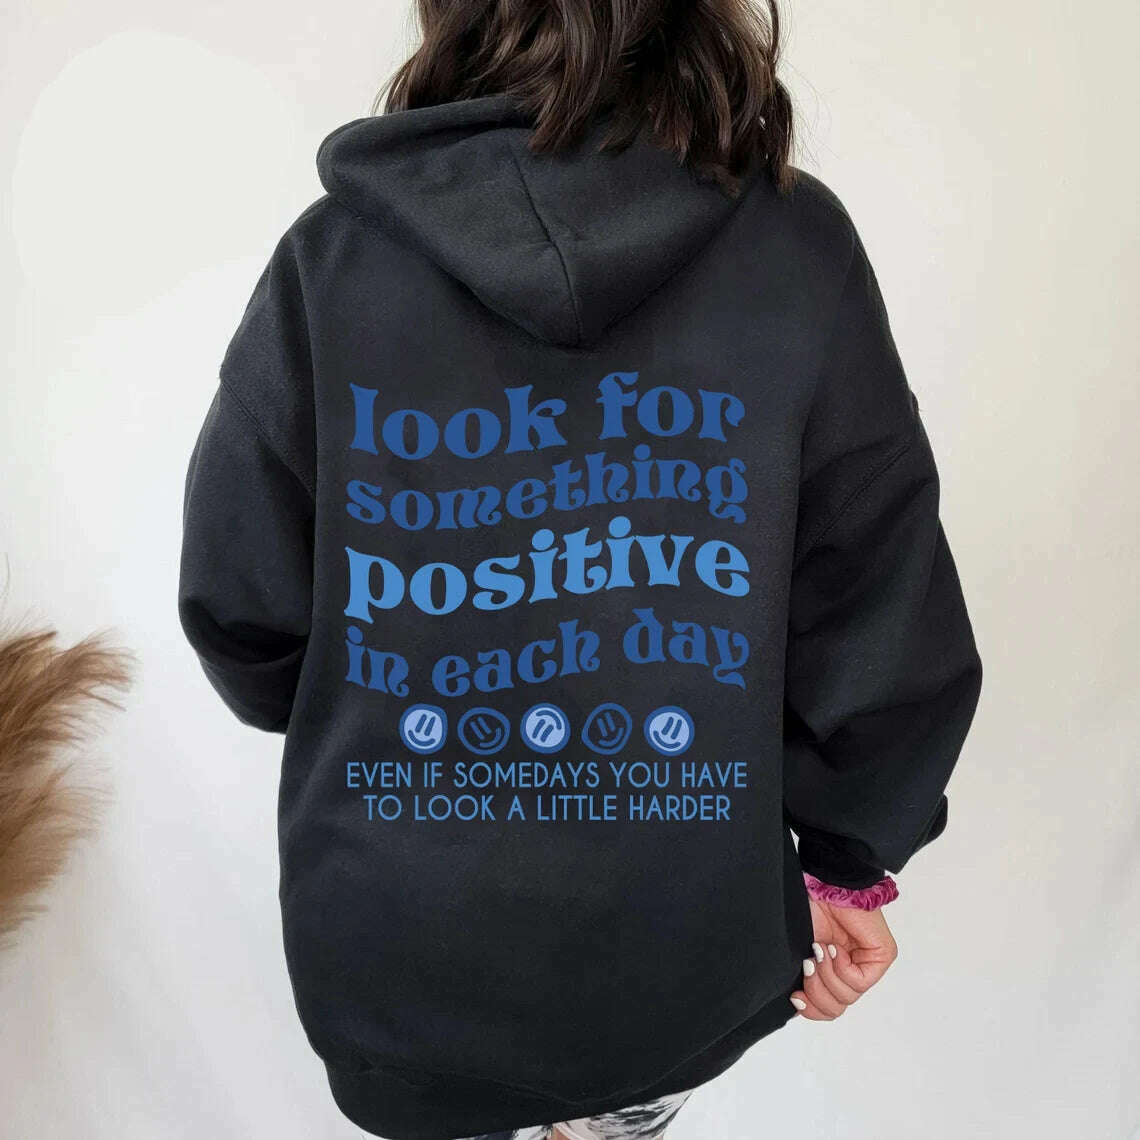 KIMLUD, Look For Something Positive In Each Day Blue Print Women Hoodies All-Match Street For Unisex Autumn Pocket Sportswear Loose Tops, Black / S, KIMLUD Womens Clothes